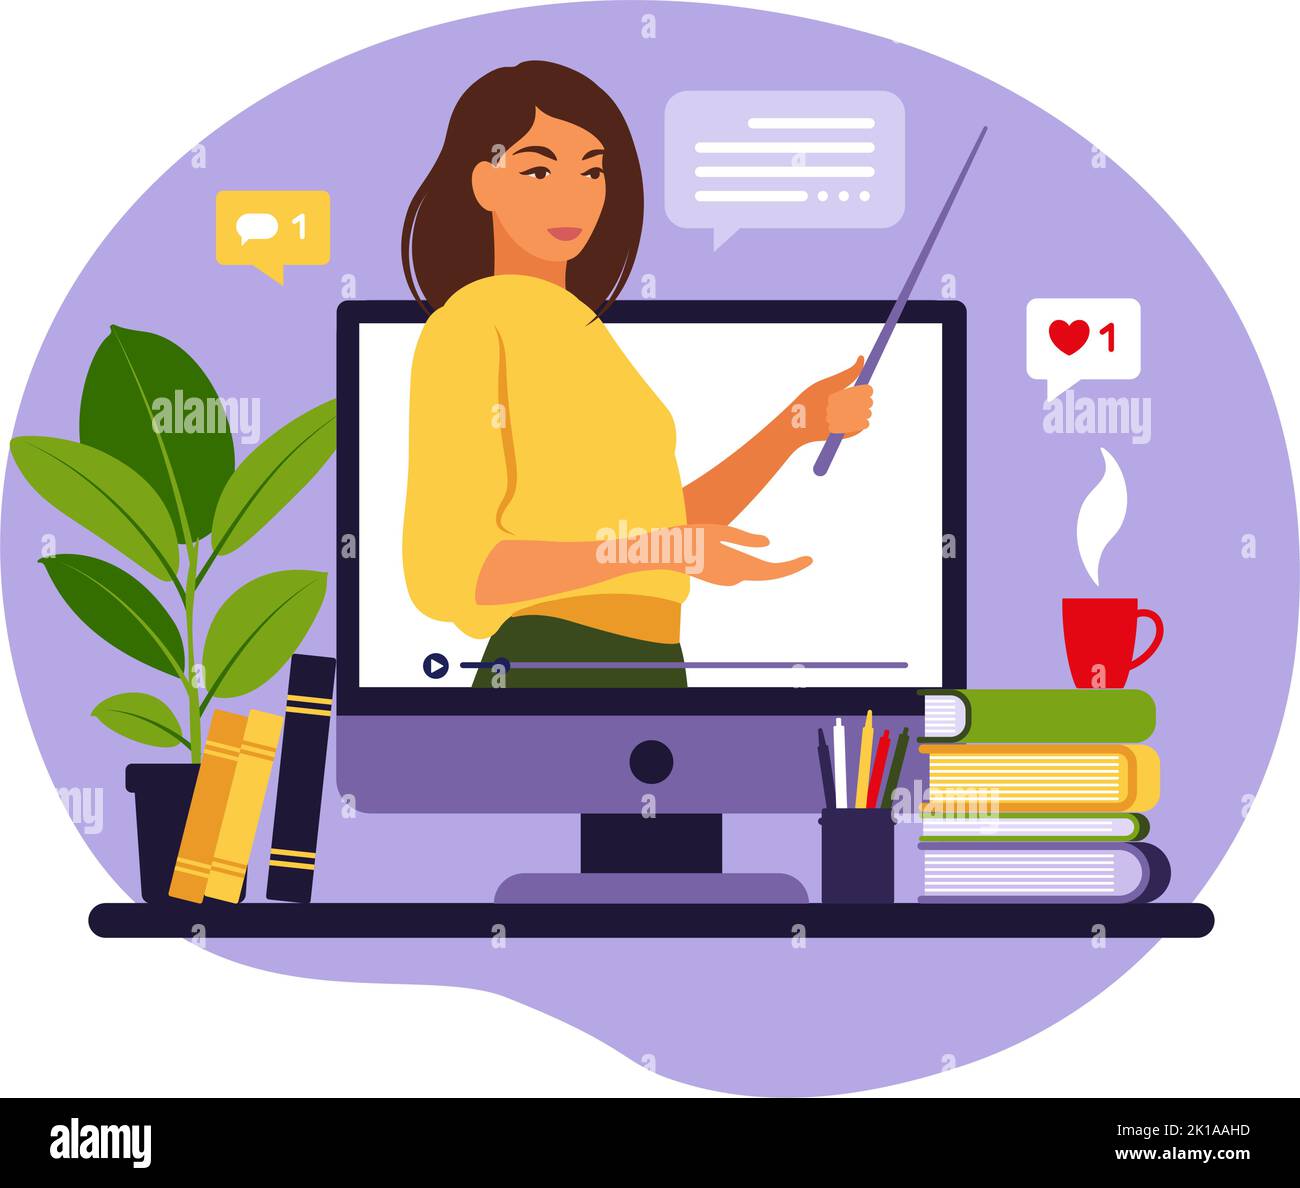 Online learning concept. Teacher at chalkboard, video lesson. Distance study at school. Vector illustration. Flat style. Stock Vector